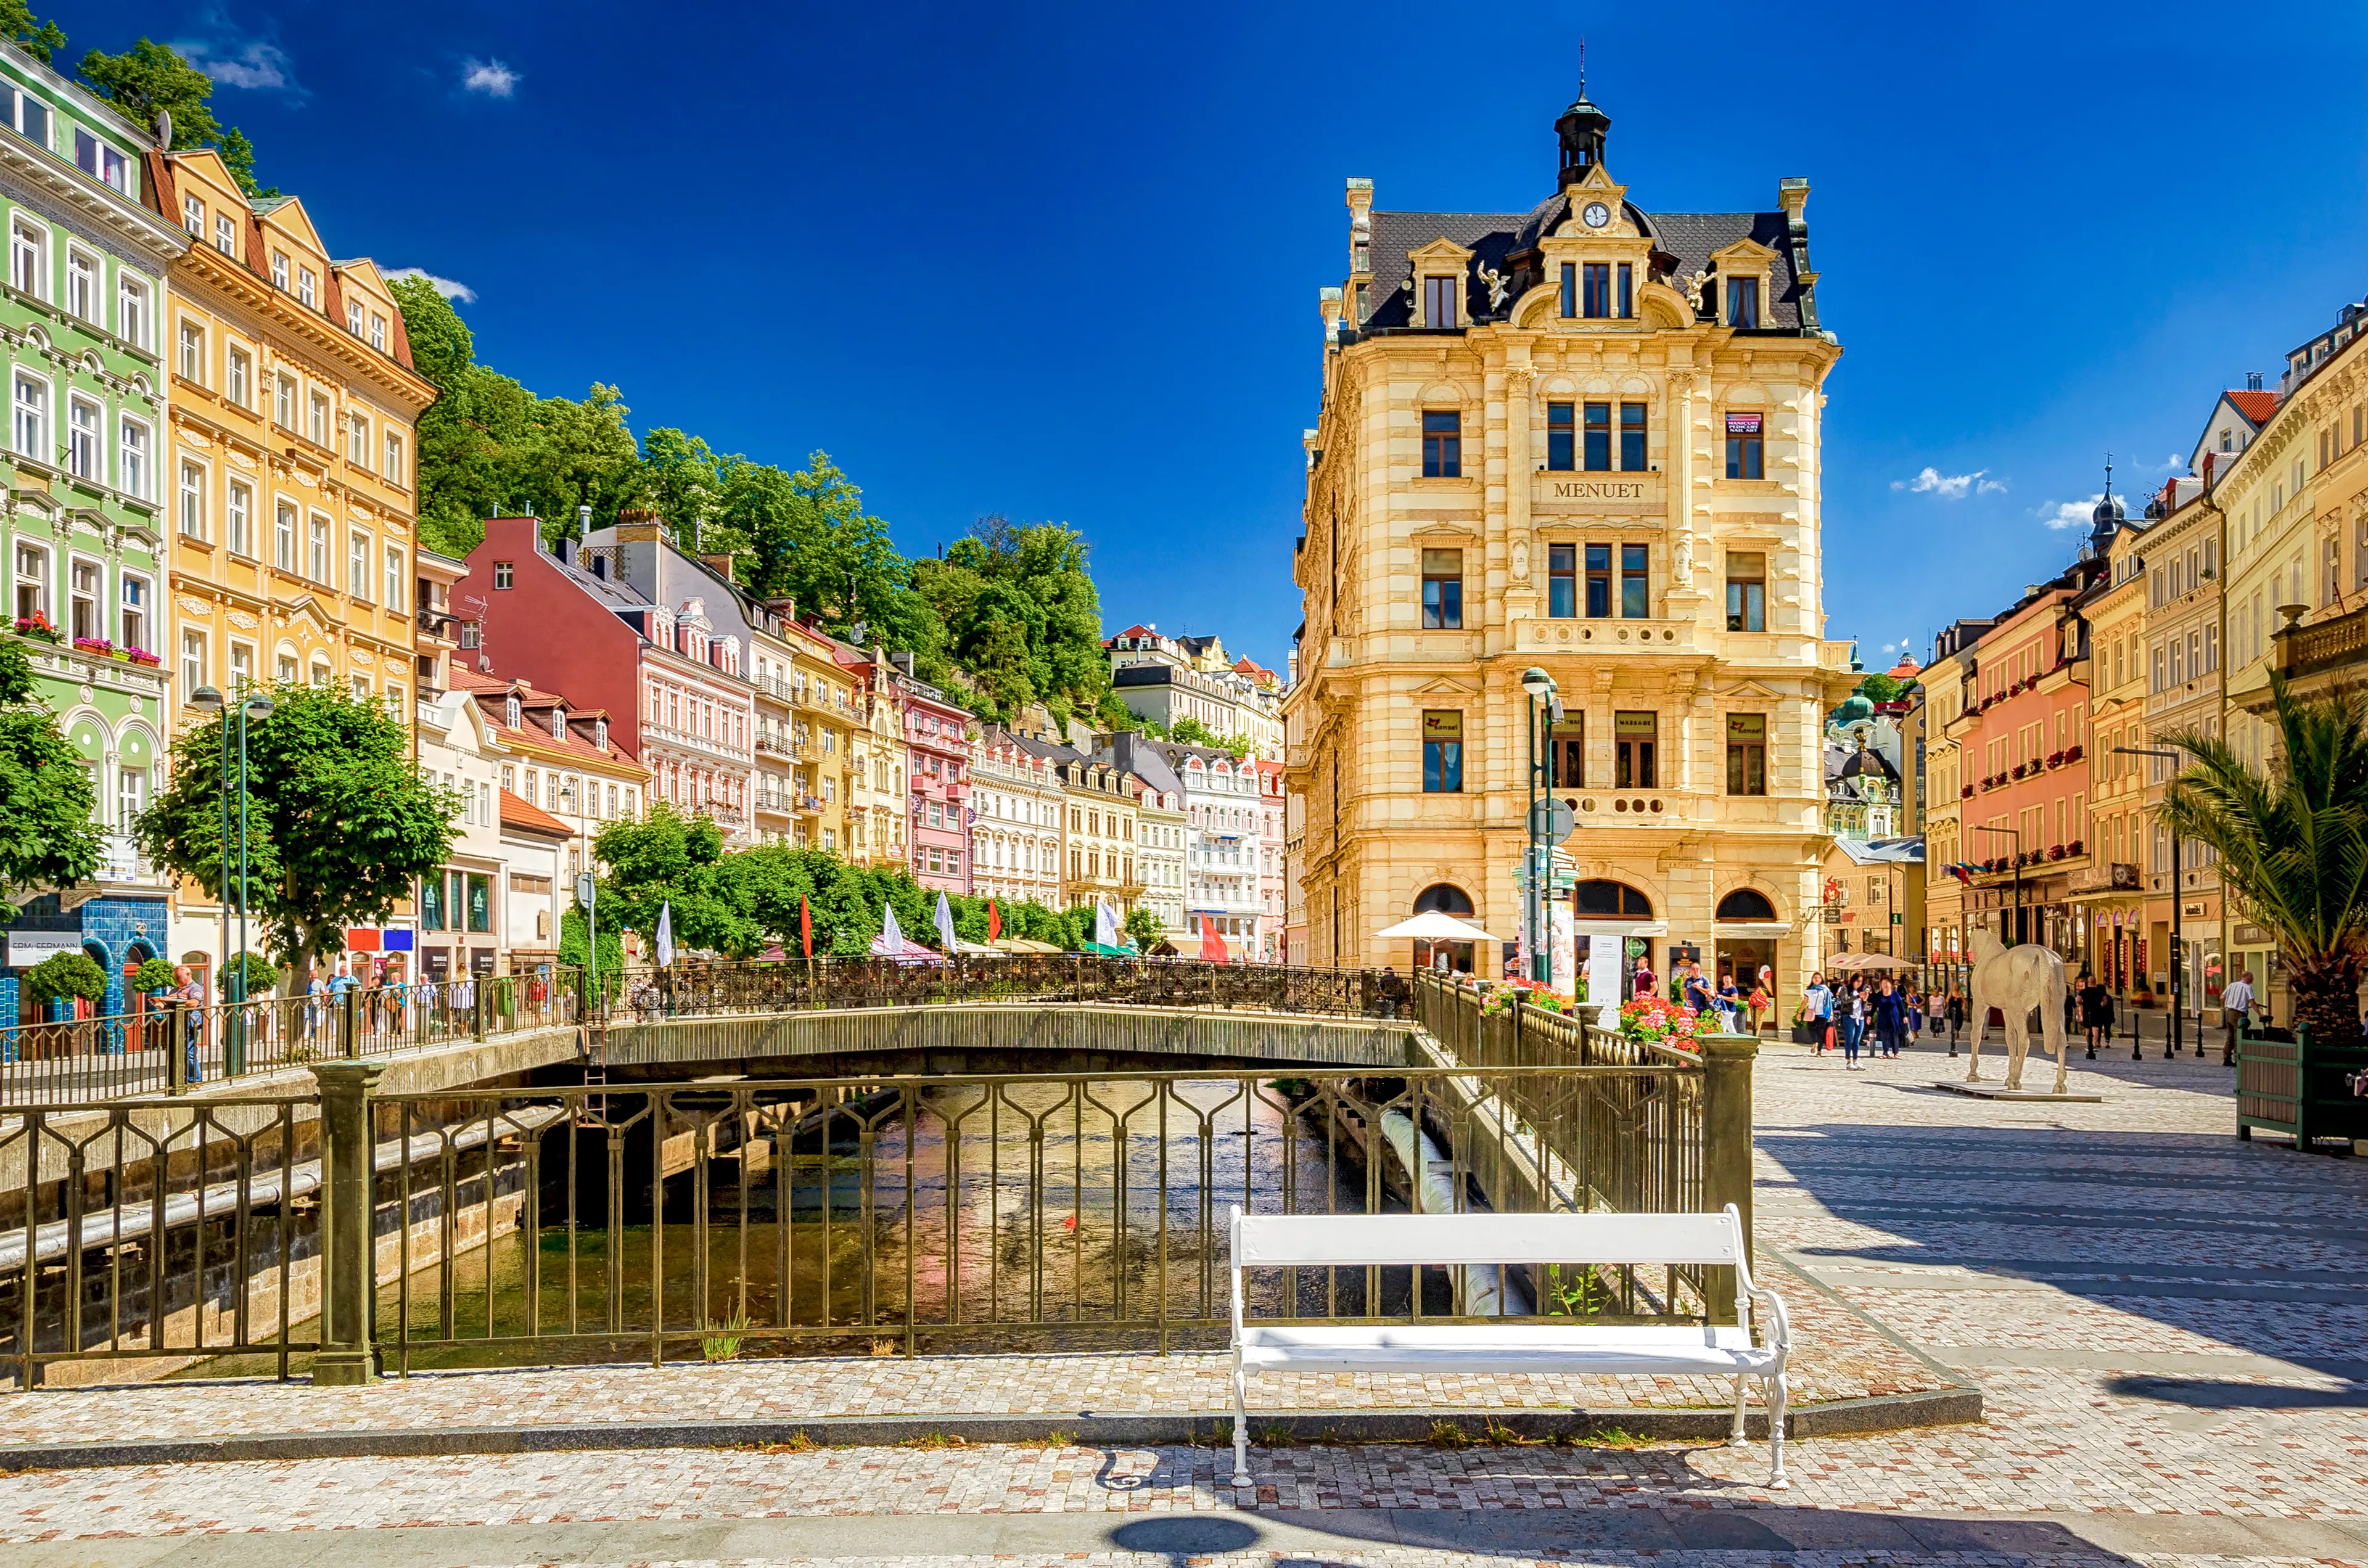 2-Day Relaxing Outdoor Adventure in Karlovy Vary, Czech Republic